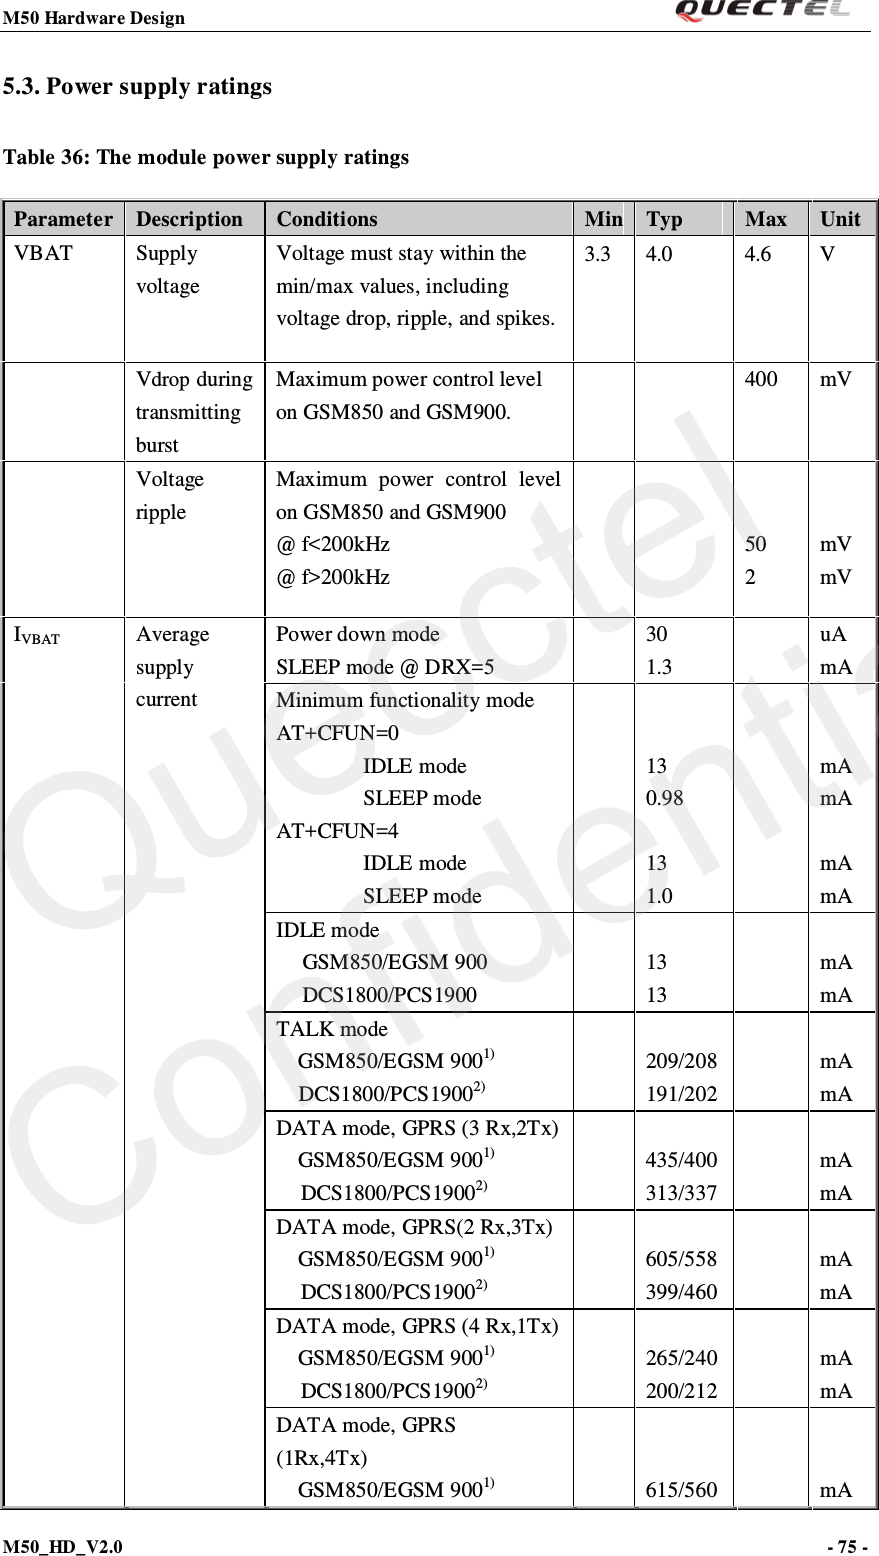 M50 Hardware Design                                                                M50_HD_V2.0                                                                      - 75 -   5.3. Power supply ratings   Table 36: The module power supply ratings Parameter Description Conditions Min Typ Max Unit VBAT Supply voltage Voltage must stay within the min/max values, including voltage drop, ripple, and spikes. 3.3  4.0 4.6  V    Vdrop during transmitting burst Maximum power control level on GSM850 and GSM900.     400 mV   Voltage ripple Maximum  power control level on GSM850 and GSM900 @ f&lt;200kHz @ f&gt;200kHz       50      2   mVmV IVBAT      Average supply current Power down mode   SLEEP mode @ DRX=5  30 1.3   uA mA Minimum functionality mode AT+CFUN=0         IDLE mode         SLEEP mode AT+CFUN=4         IDLE mode         SLEEP mode     13 0.98  13 1.0     mA mA  mA mA IDLE mode   GSM850/EGSM 900 DCS1800/PCS1900    13 13    mA mA TALK mode   GSM850/EGSM 9001)   DCS1800/PCS19002)    209/208 191/202     mA mA DATA mode, GPRS (3 Rx,2Tx) GSM850/EGSM 9001) DCS1800/PCS19002)      435/400 313/337    mA mA DATA mode, GPRS(2 Rx,3Tx) GSM850/EGSM 9001) DCS1800/PCS19002)      605/558 399/460    mA mA DATA mode, GPRS (4 Rx,1Tx) GSM850/EGSM 9001) DCS1800/PCS19002)    265/240 200/212    mA mA DATA mode, GPRS   (1Rx,4Tx) GSM850/EGSM 9001)     615/560     mA Quecctel Confidential